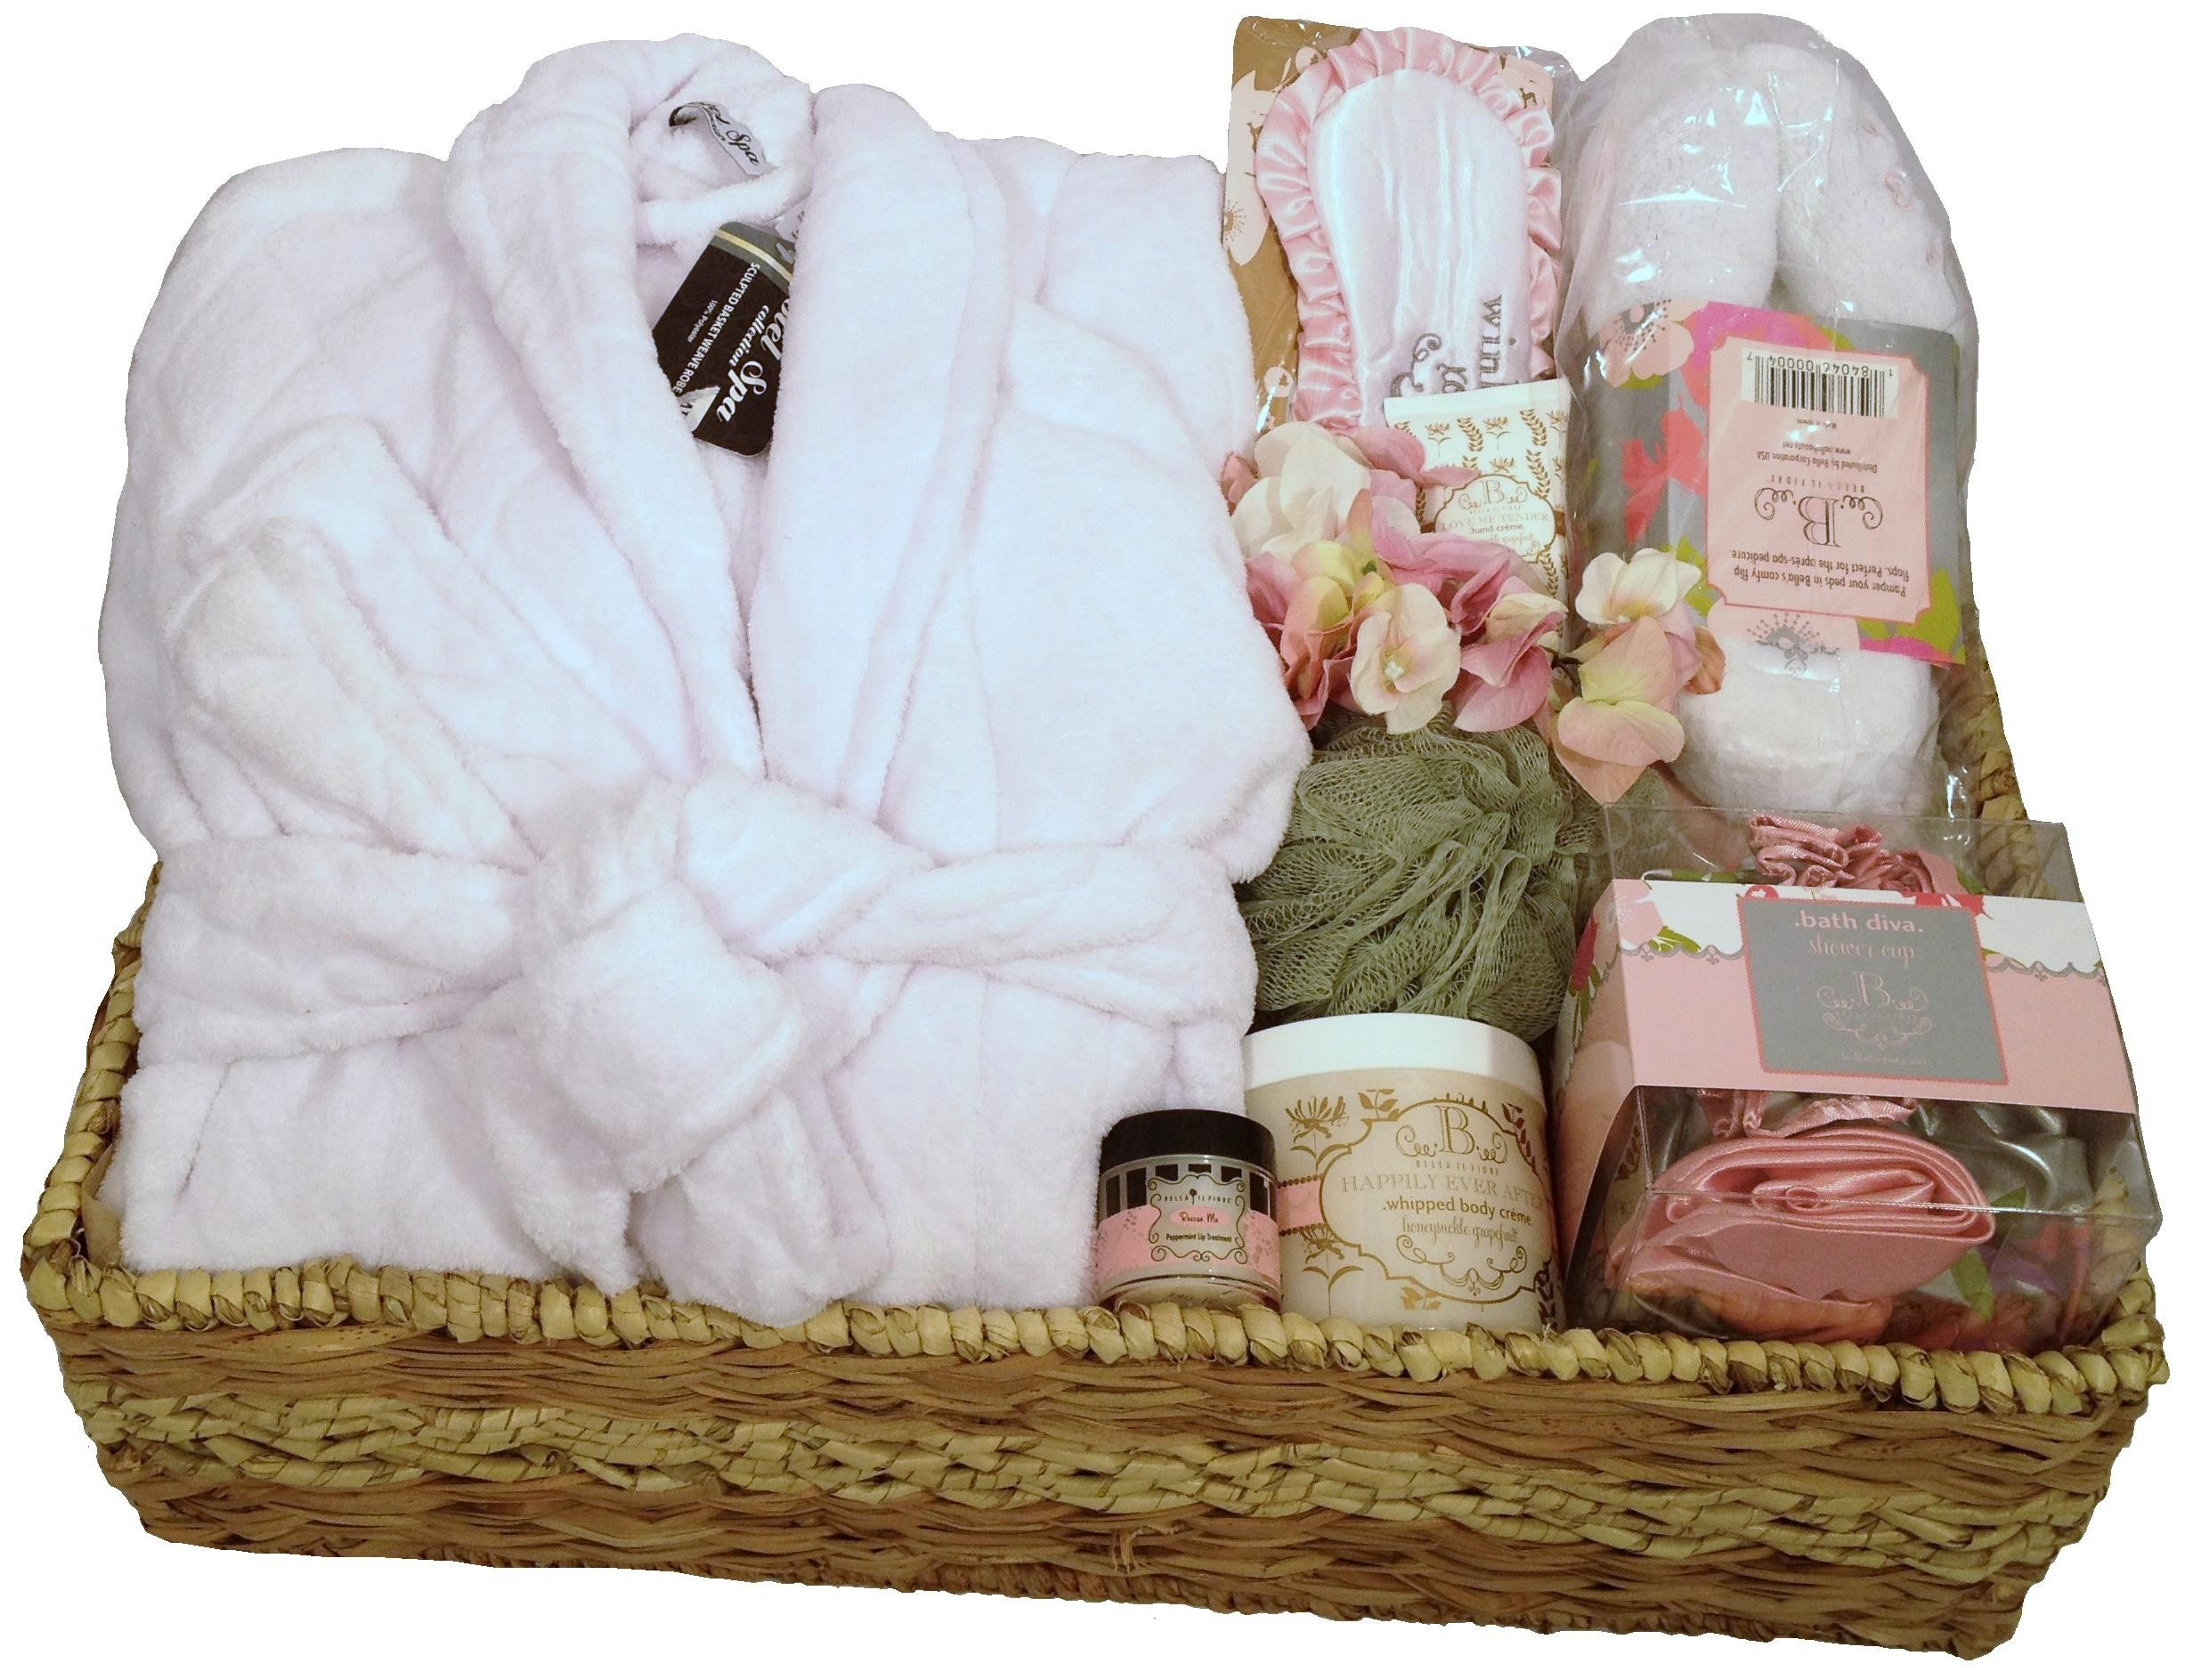 Spa Gift Basket Ideas
 DELUXE HOTEL SPA GIFT BASKET Sweet Day Designs